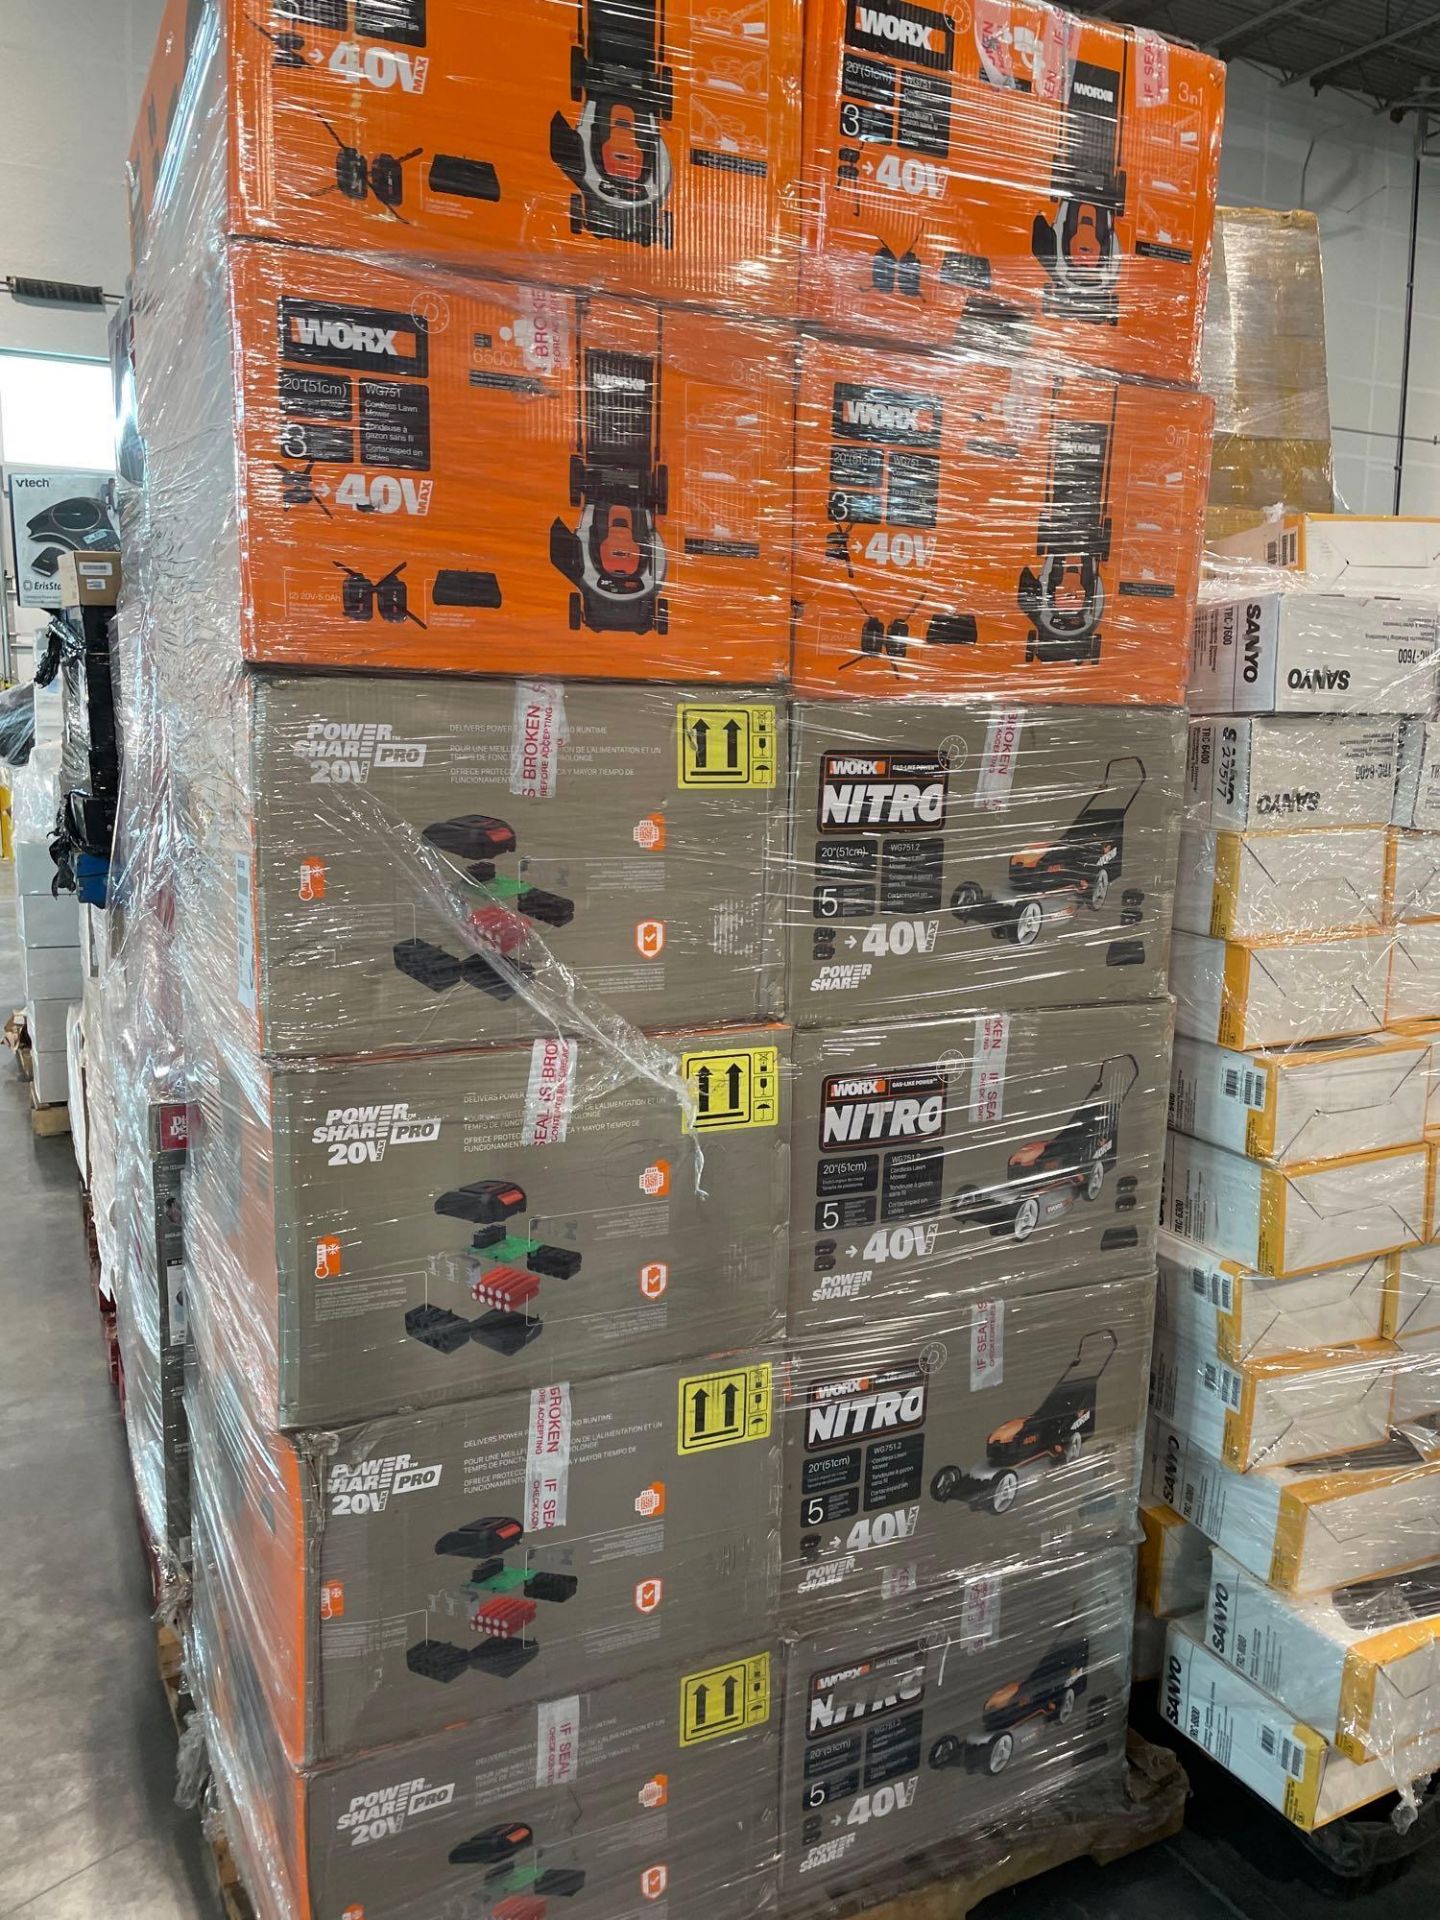 pallet of work nitro lawn mowers some may not have batteries and chargers - Image 2 of 3